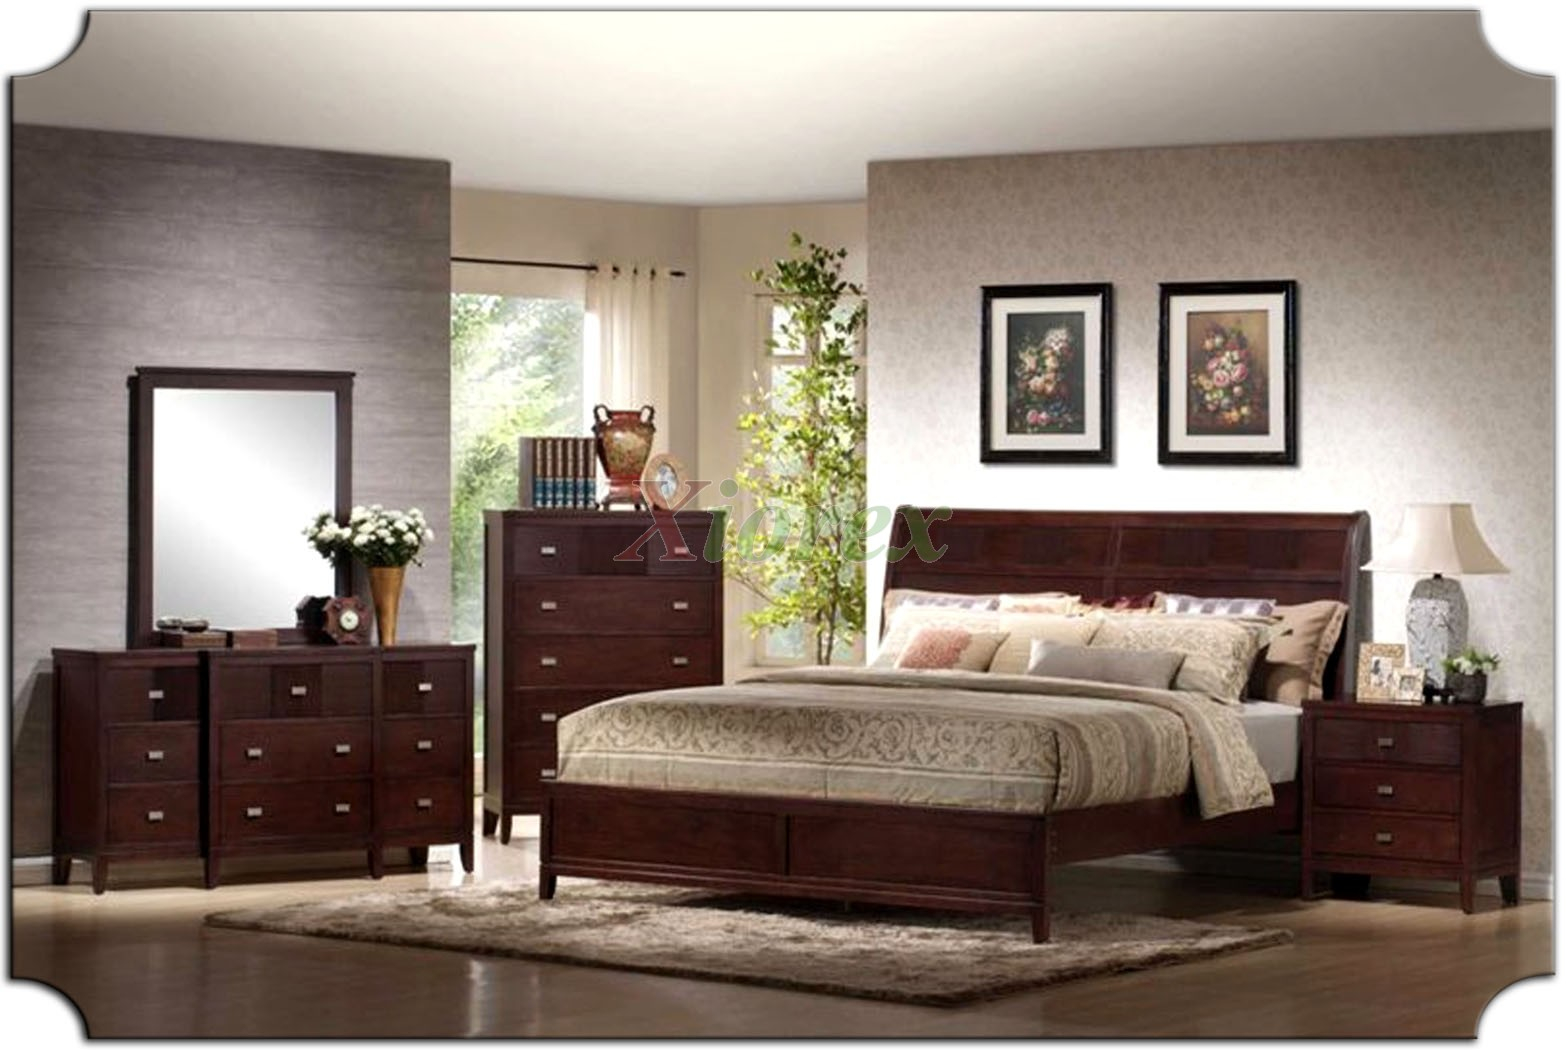 Bedroom Furniture Sets For Your Bedroom Elites Home Decor within size 1566 X 1050